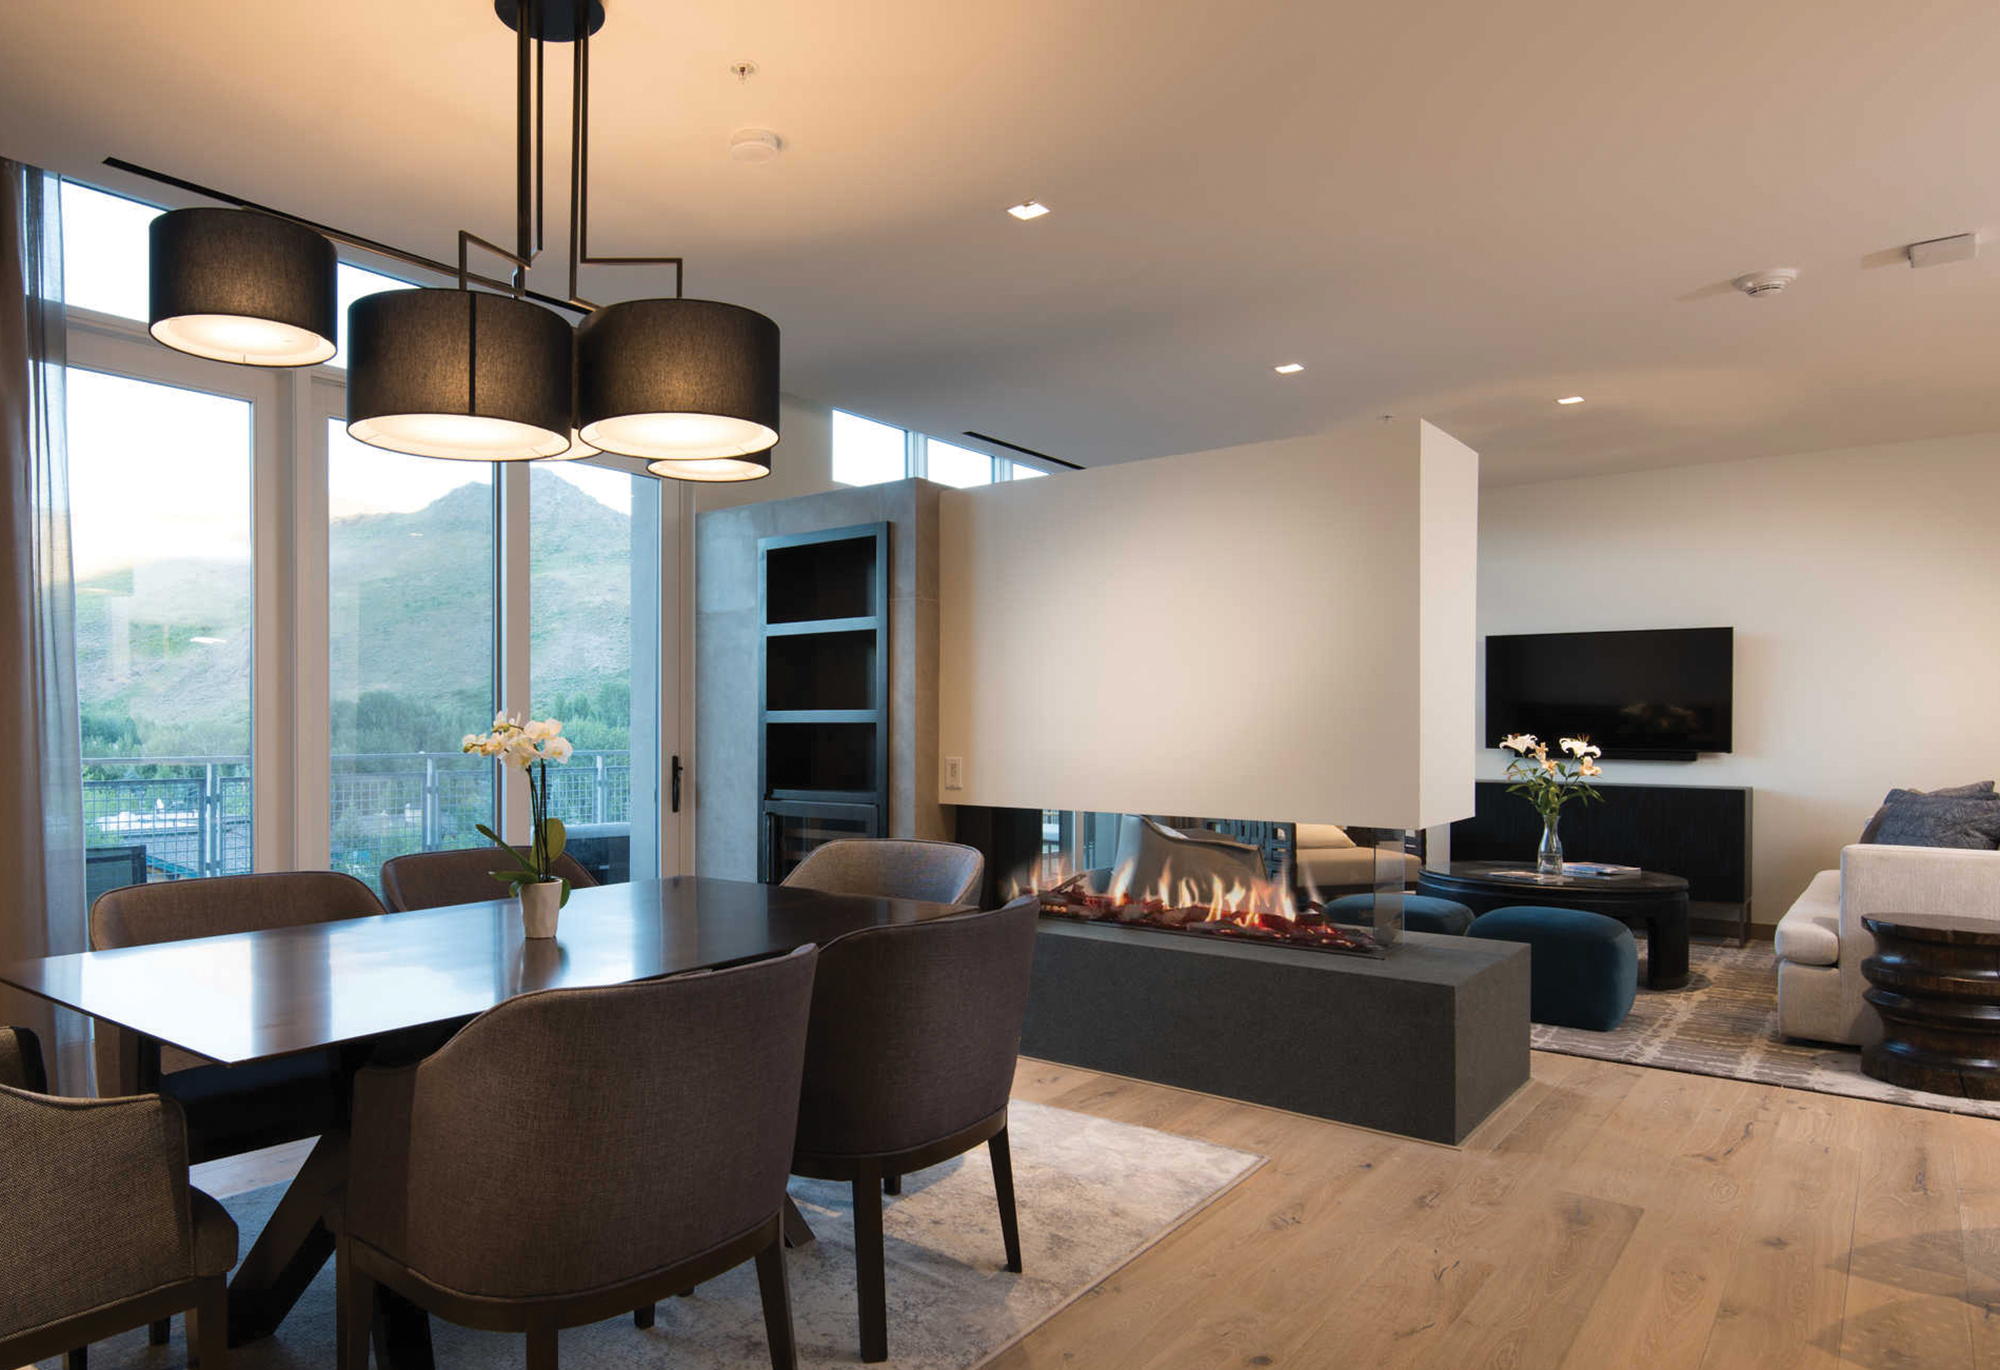 Modern room with Linear Peninsula fireplace. Photography by Tory Taglio